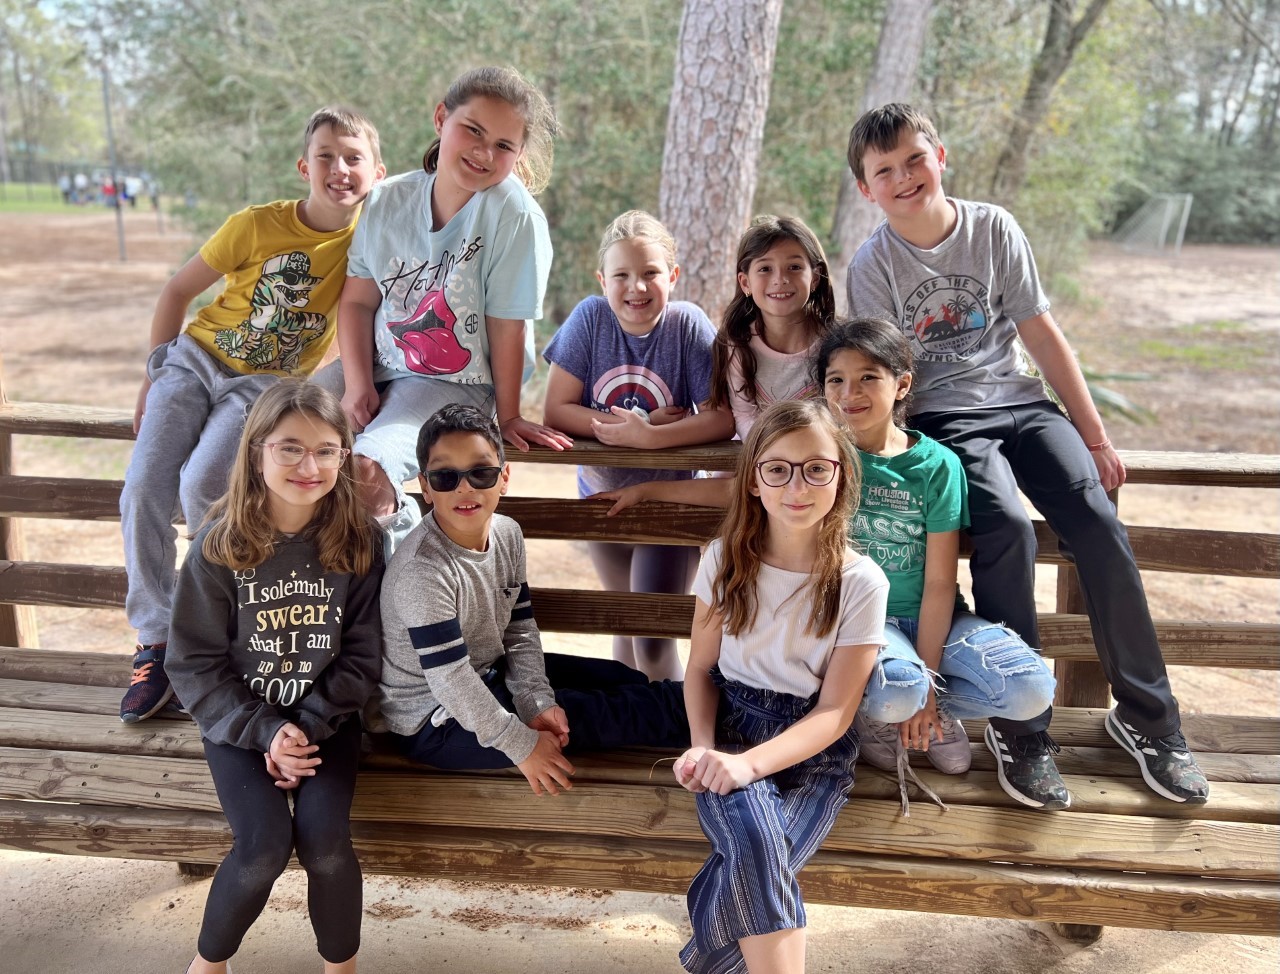 Students at Galatas enjoy spending time with their friends outside!